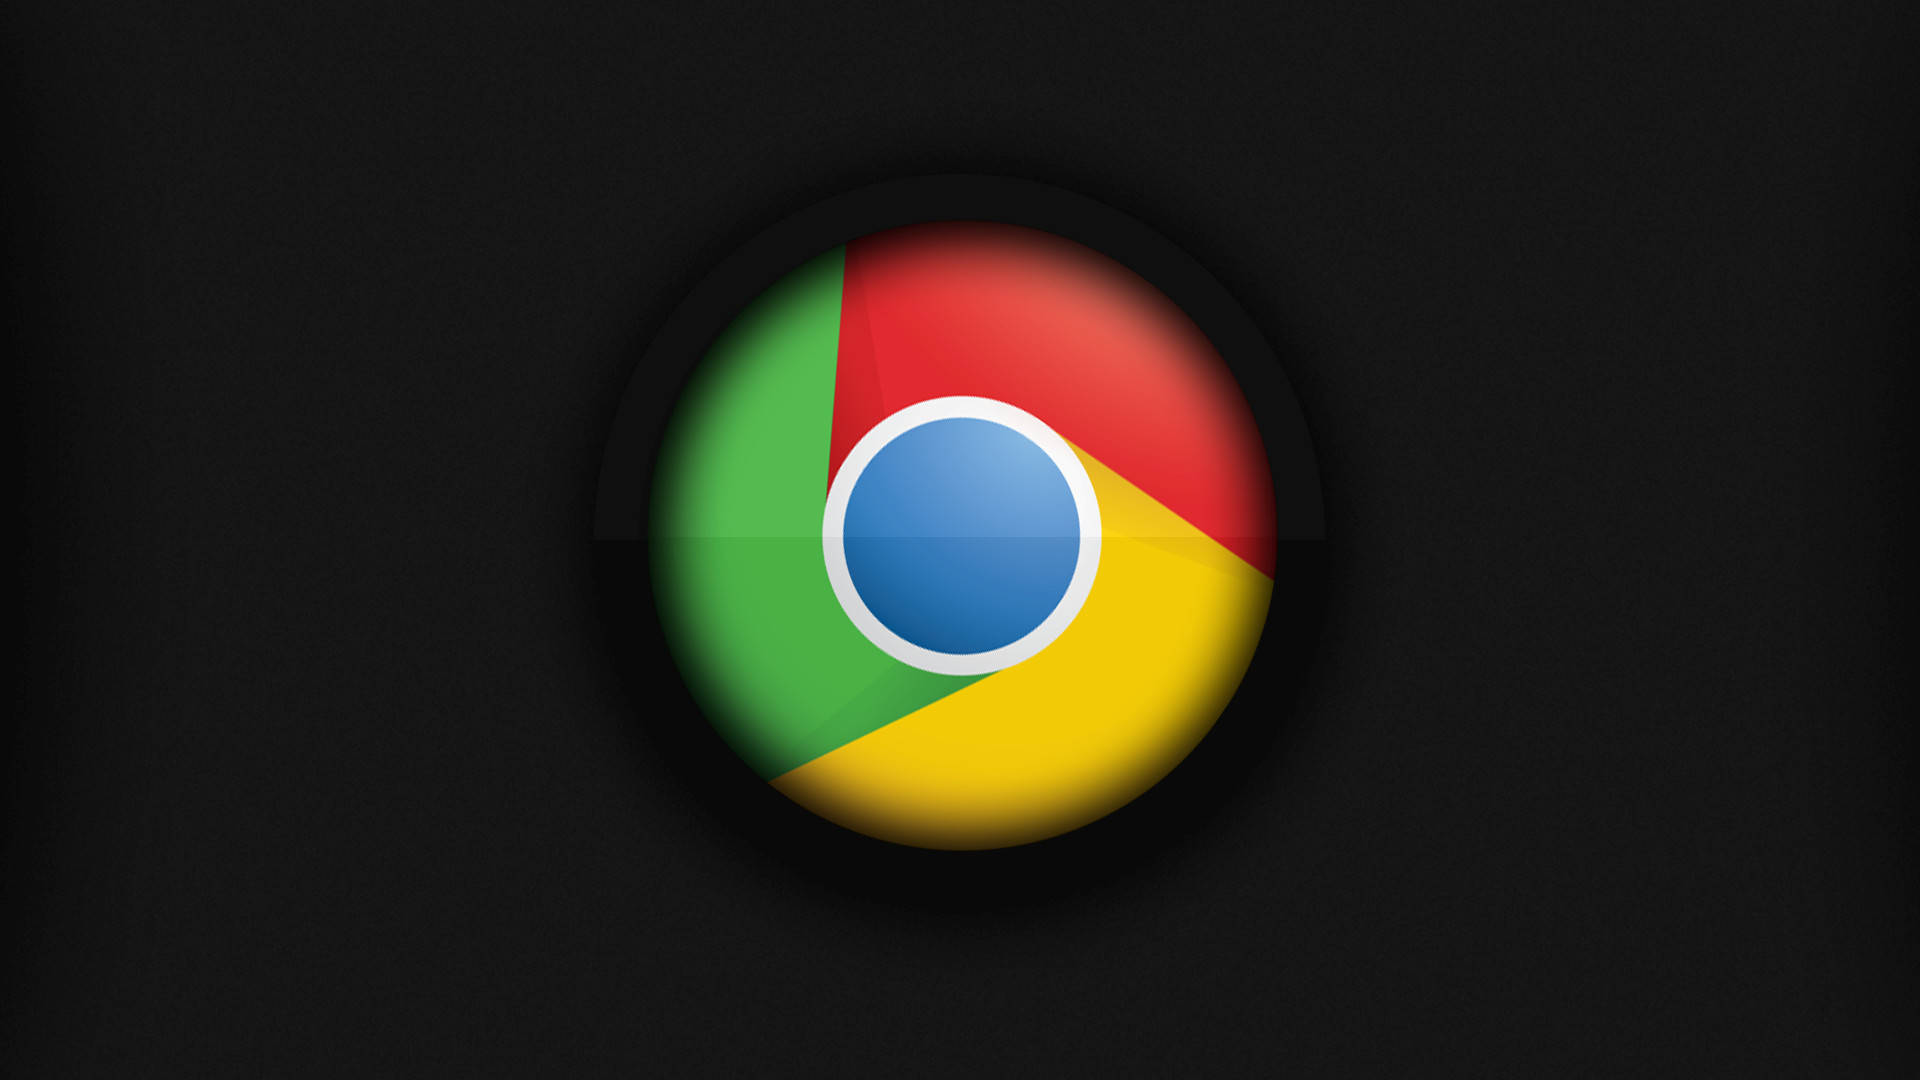 Free Chrome Wallpaper Downloads, [100+] Chrome Wallpapers for FREE |  